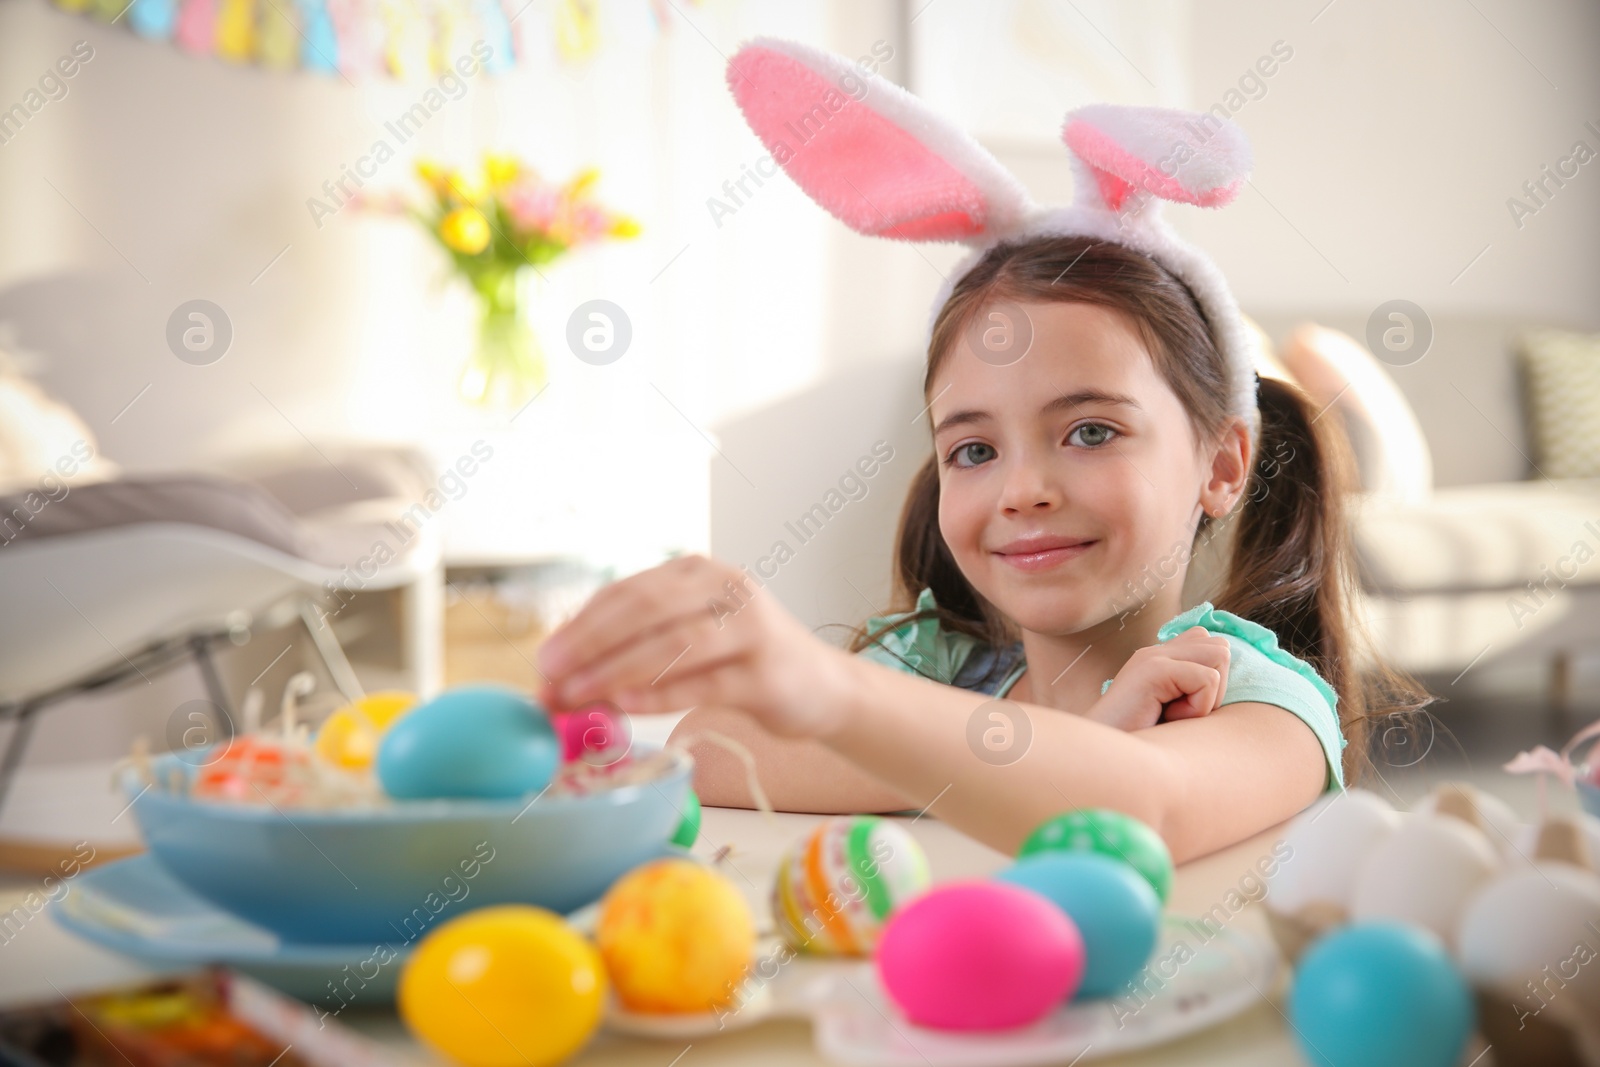 Photo of Cute little girl in bunny ears headband painting Easter eggs at table indoors